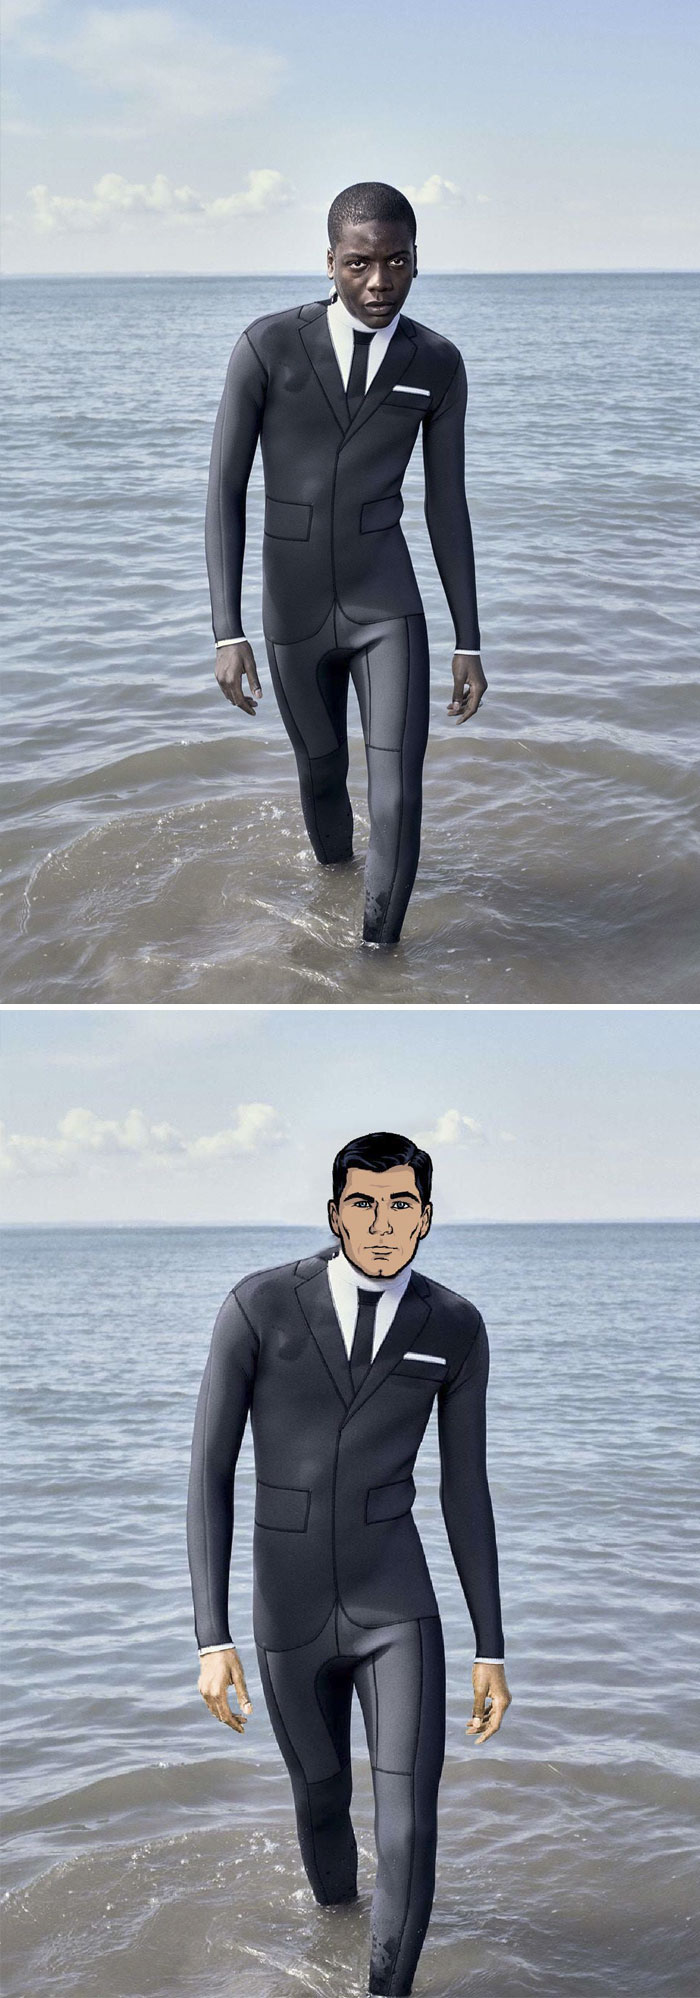 This Man Wearing A Suit, Wetsuit